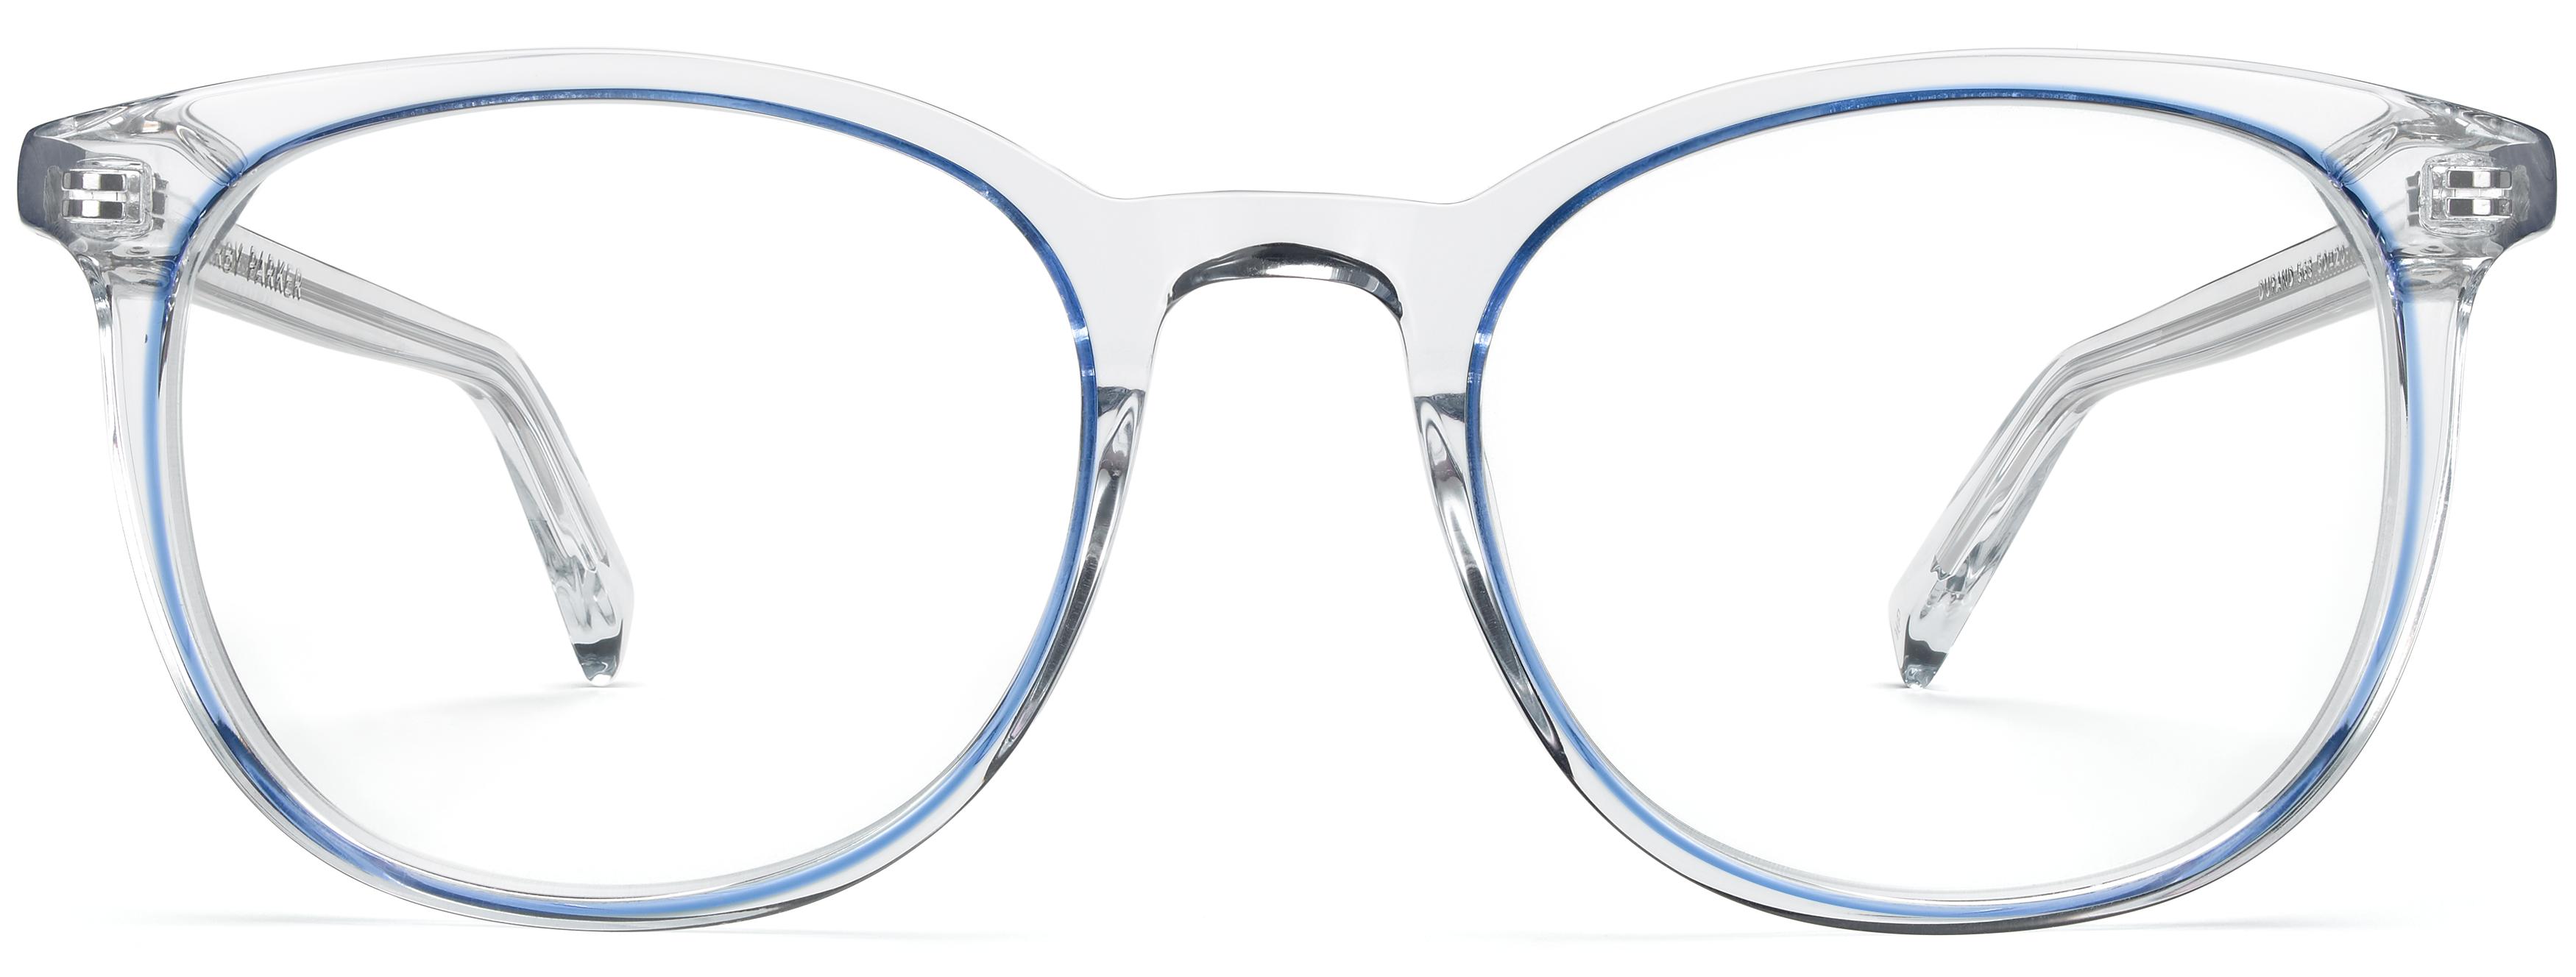 Durand Eyeglasses in Crystal with Blue Jay | Warby Parker